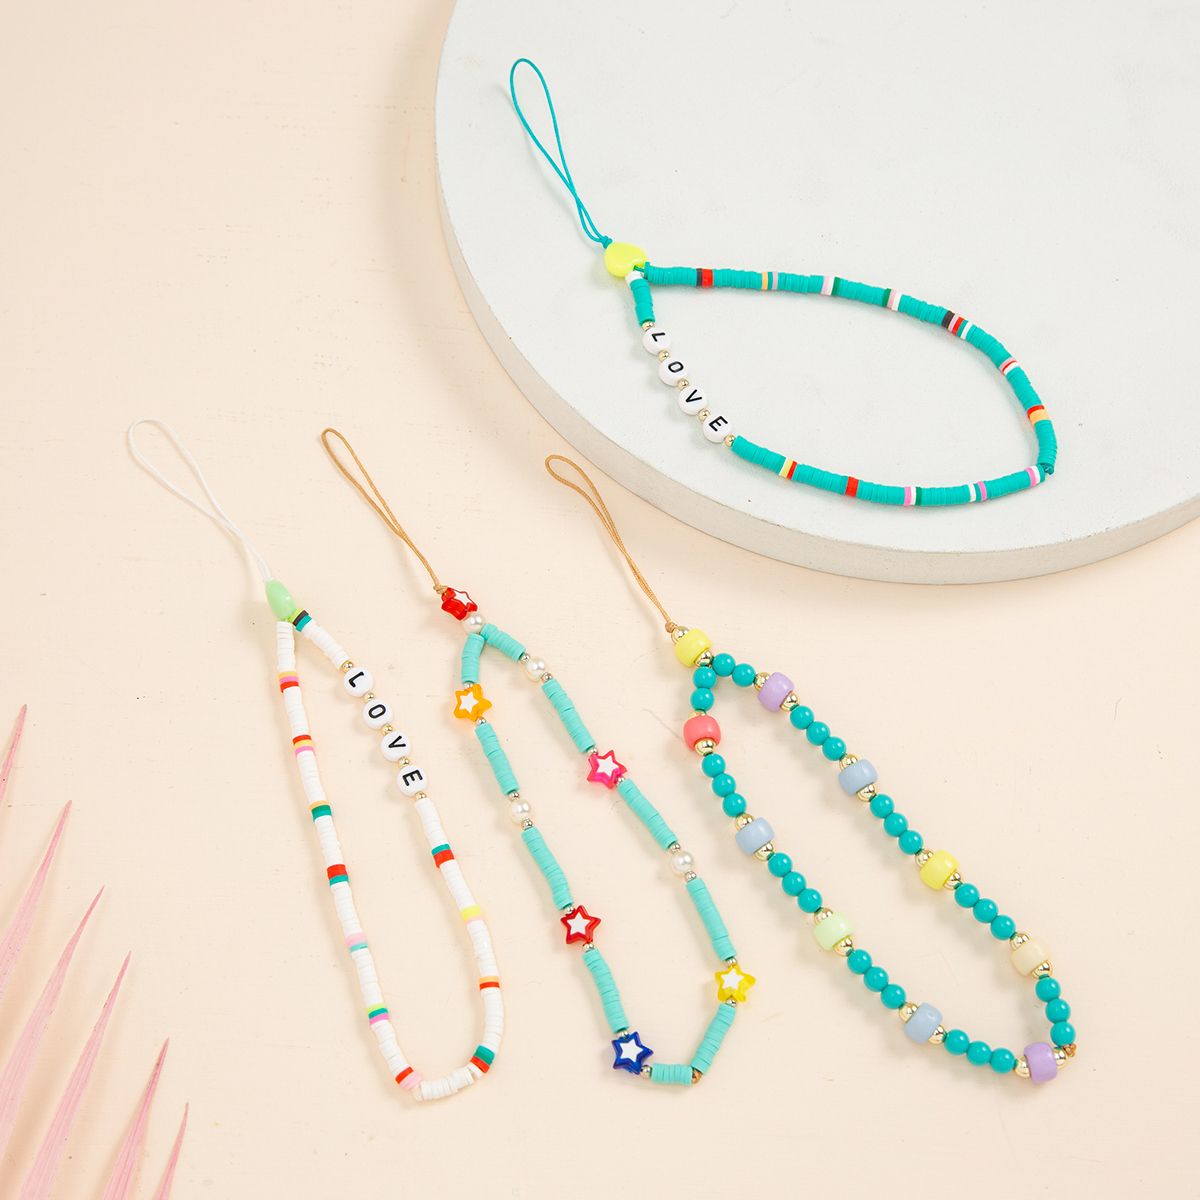 NQMODL SHOP New Colorful Anti-Lost Acrylic Bead Mobile Phone Strap Lanyard Soft Pottery Rope Phone Chain Cell Phone Case Hanging Cord